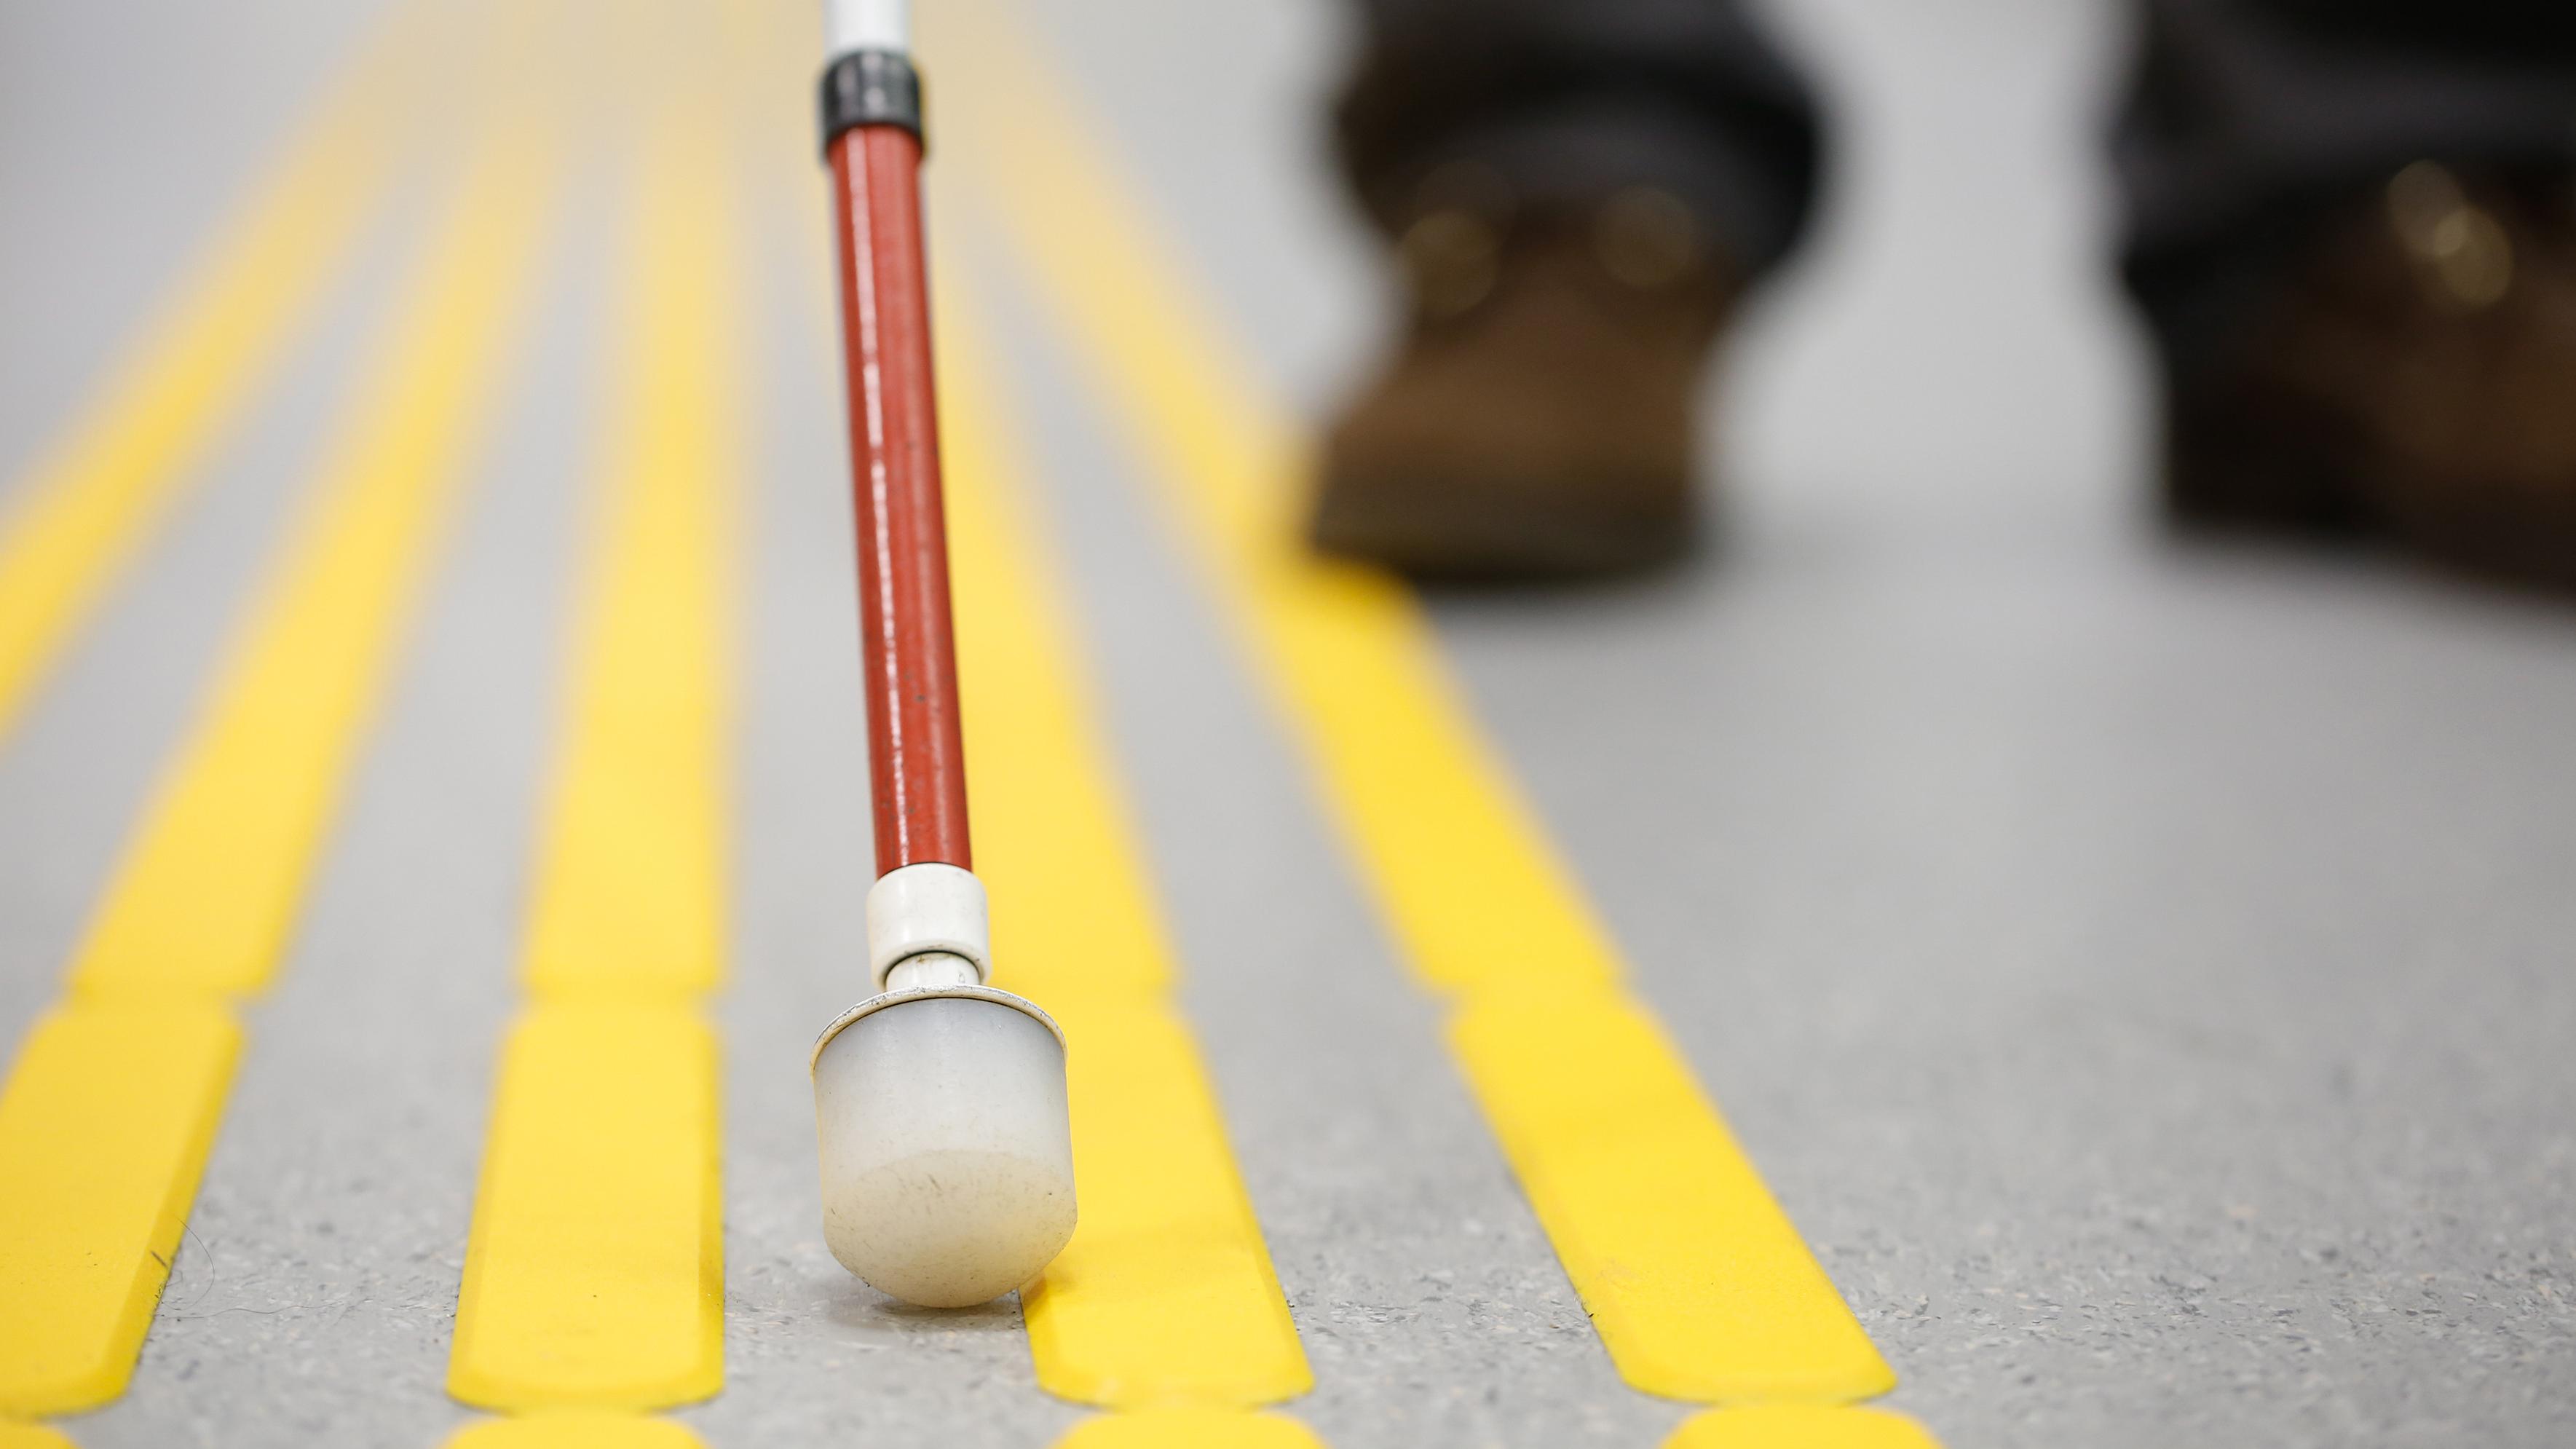 A white cane being used on pavement with raised yellow lines.